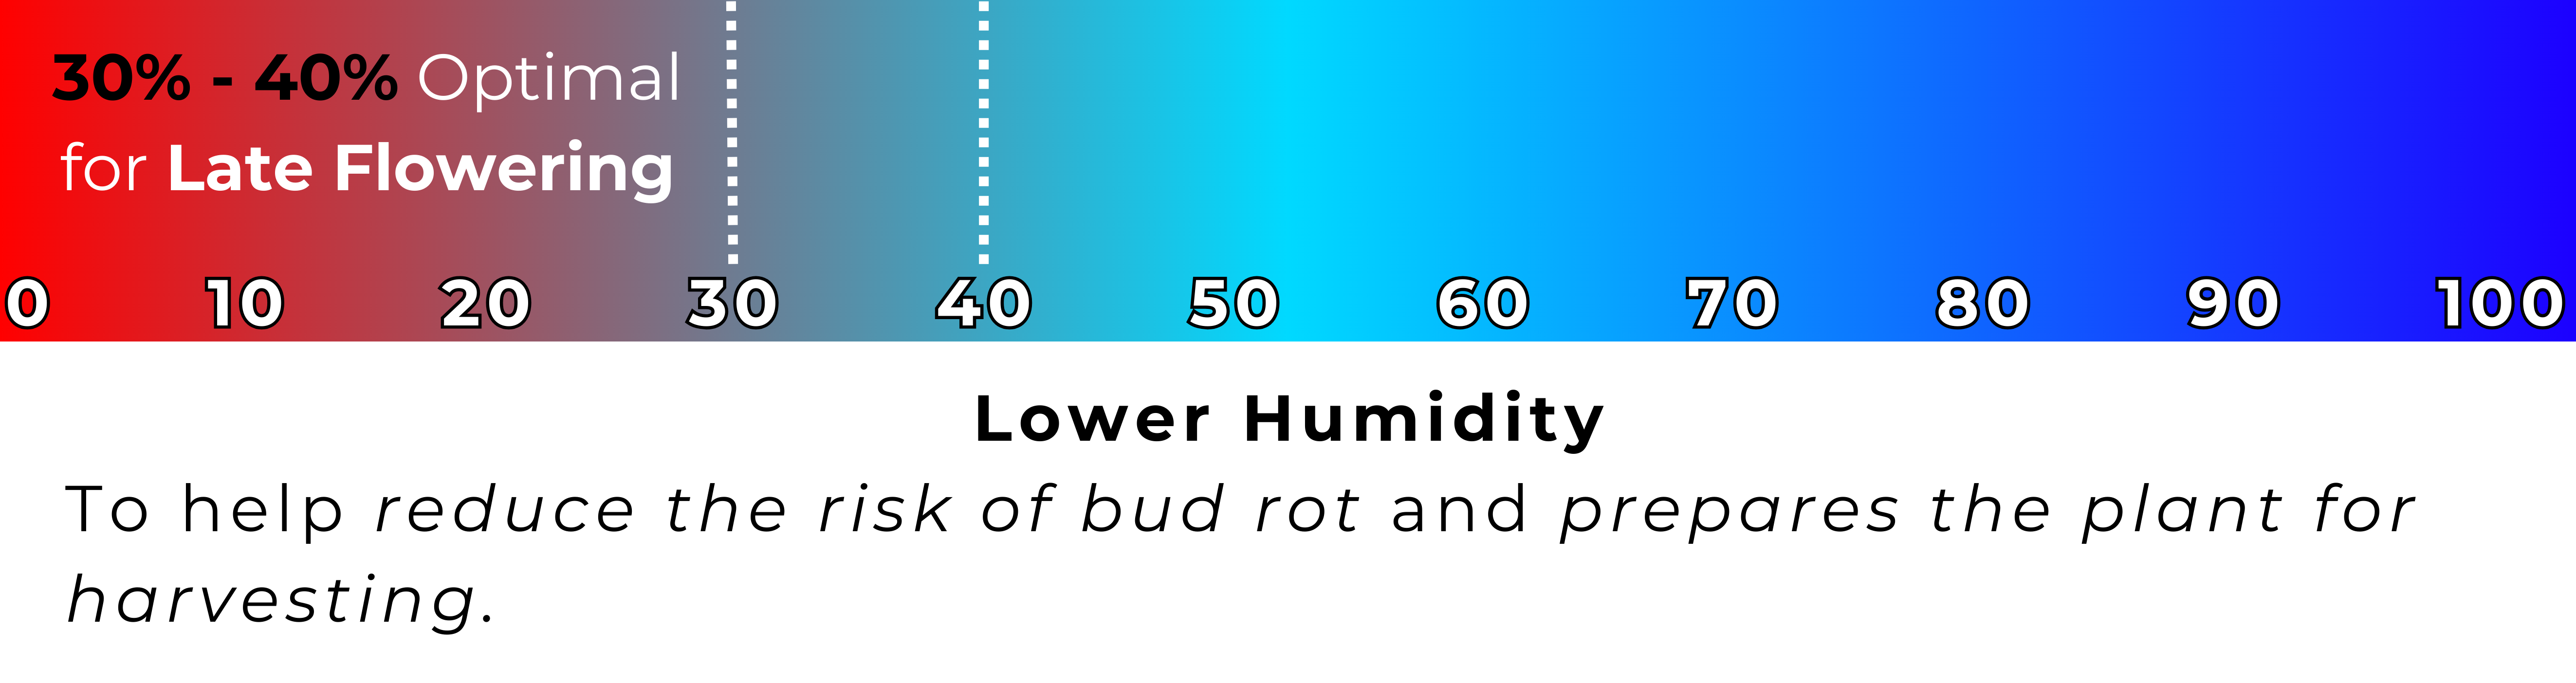 "A visual guide illustrating the 30-40% optimal humidity range for the late flowering stage of cannabis growth, set against a 0 to 100 scale with a blue to red gradient. The accompanying text notes this lower humidity helps reduce the risk of bud rot and prepares the plant for harvesting.